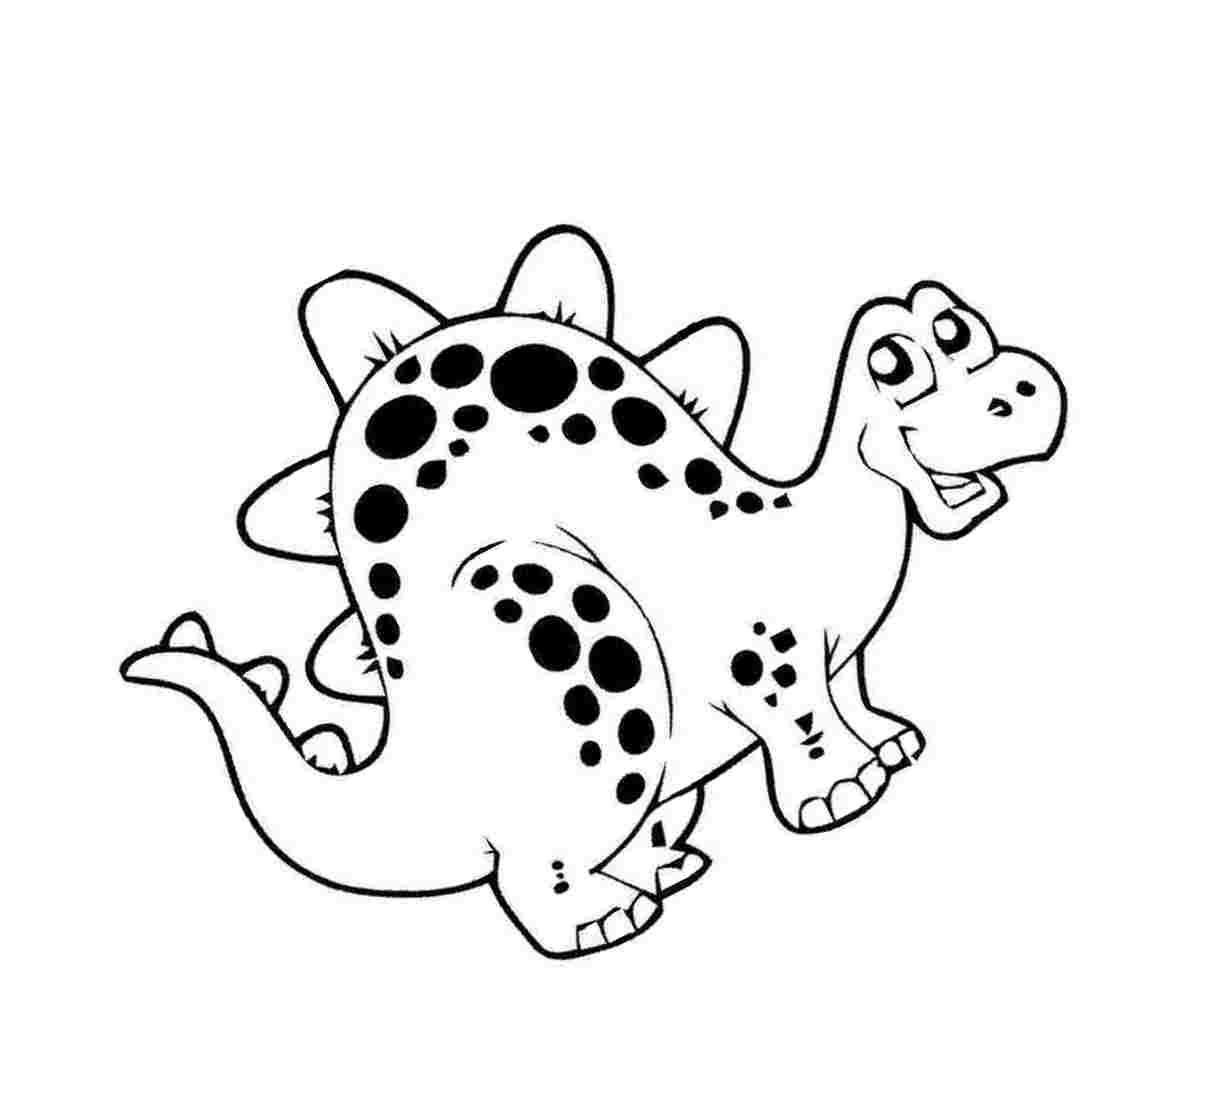 Download Dinosaur Coloring Pages For Preschoolers - Coloring Home